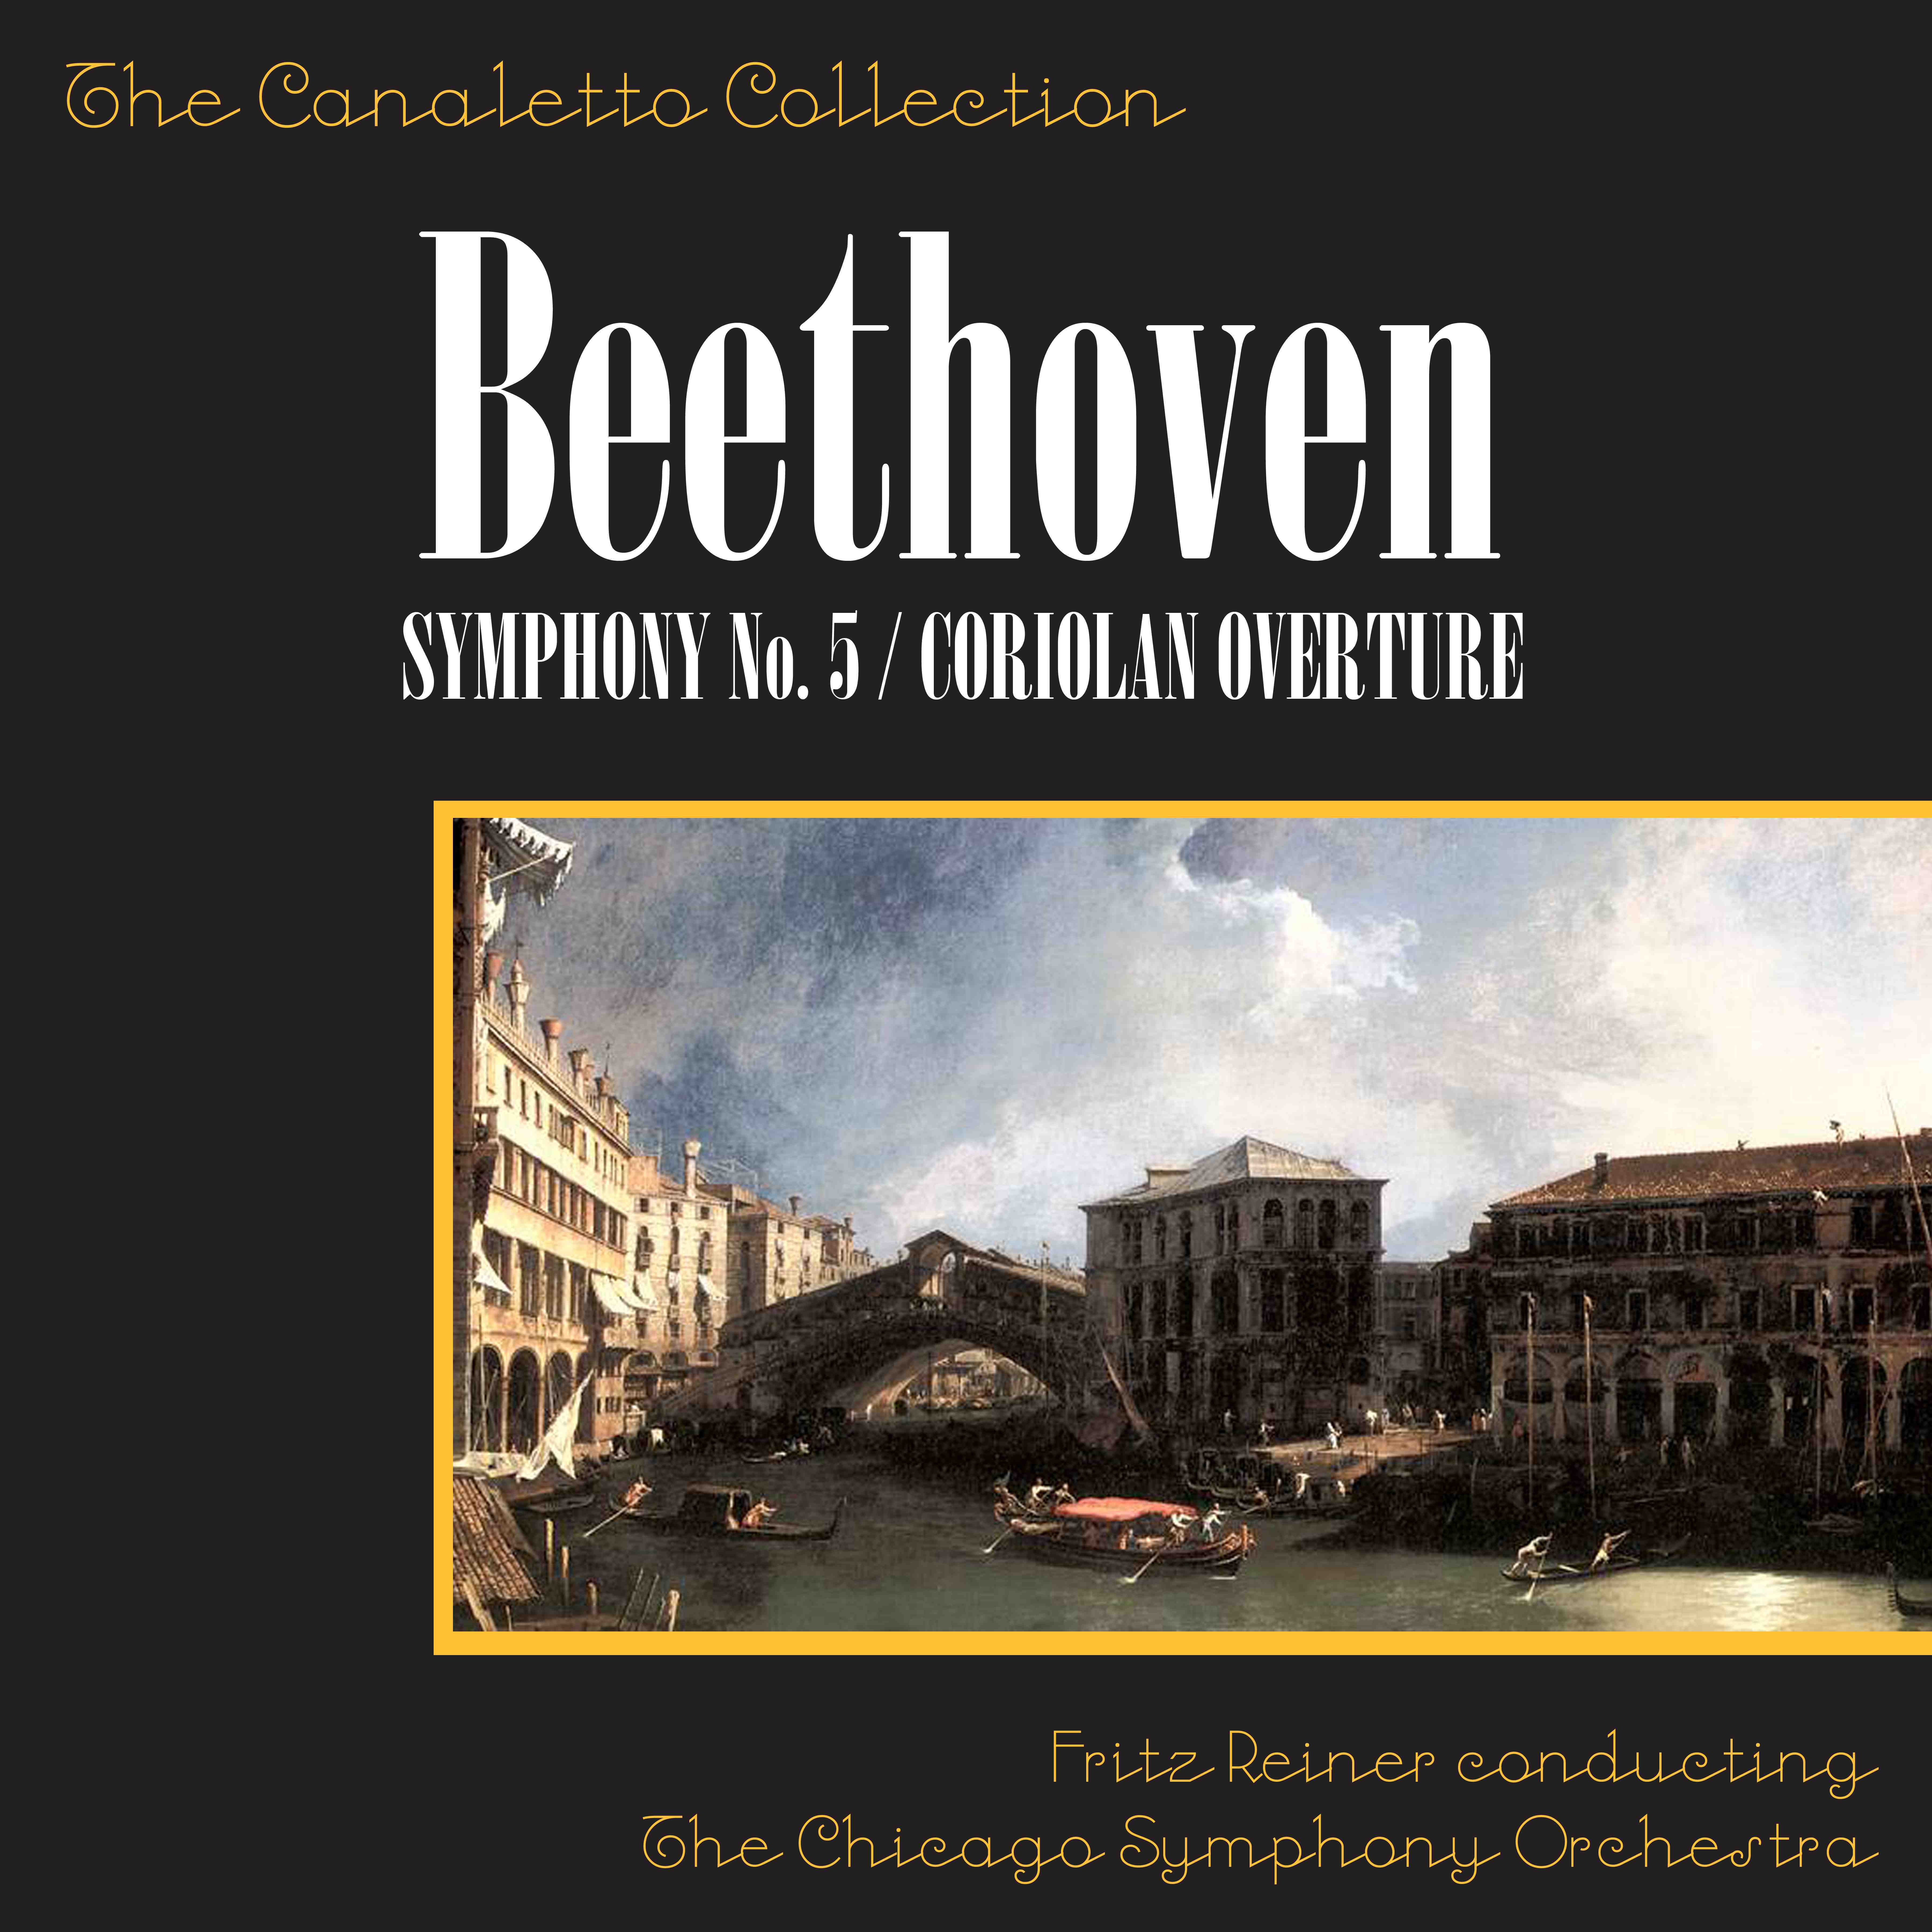 Beethoven: Symphony No. 5 In C Minor, Op. 67: Fourth Movement - Allegro Maestoso